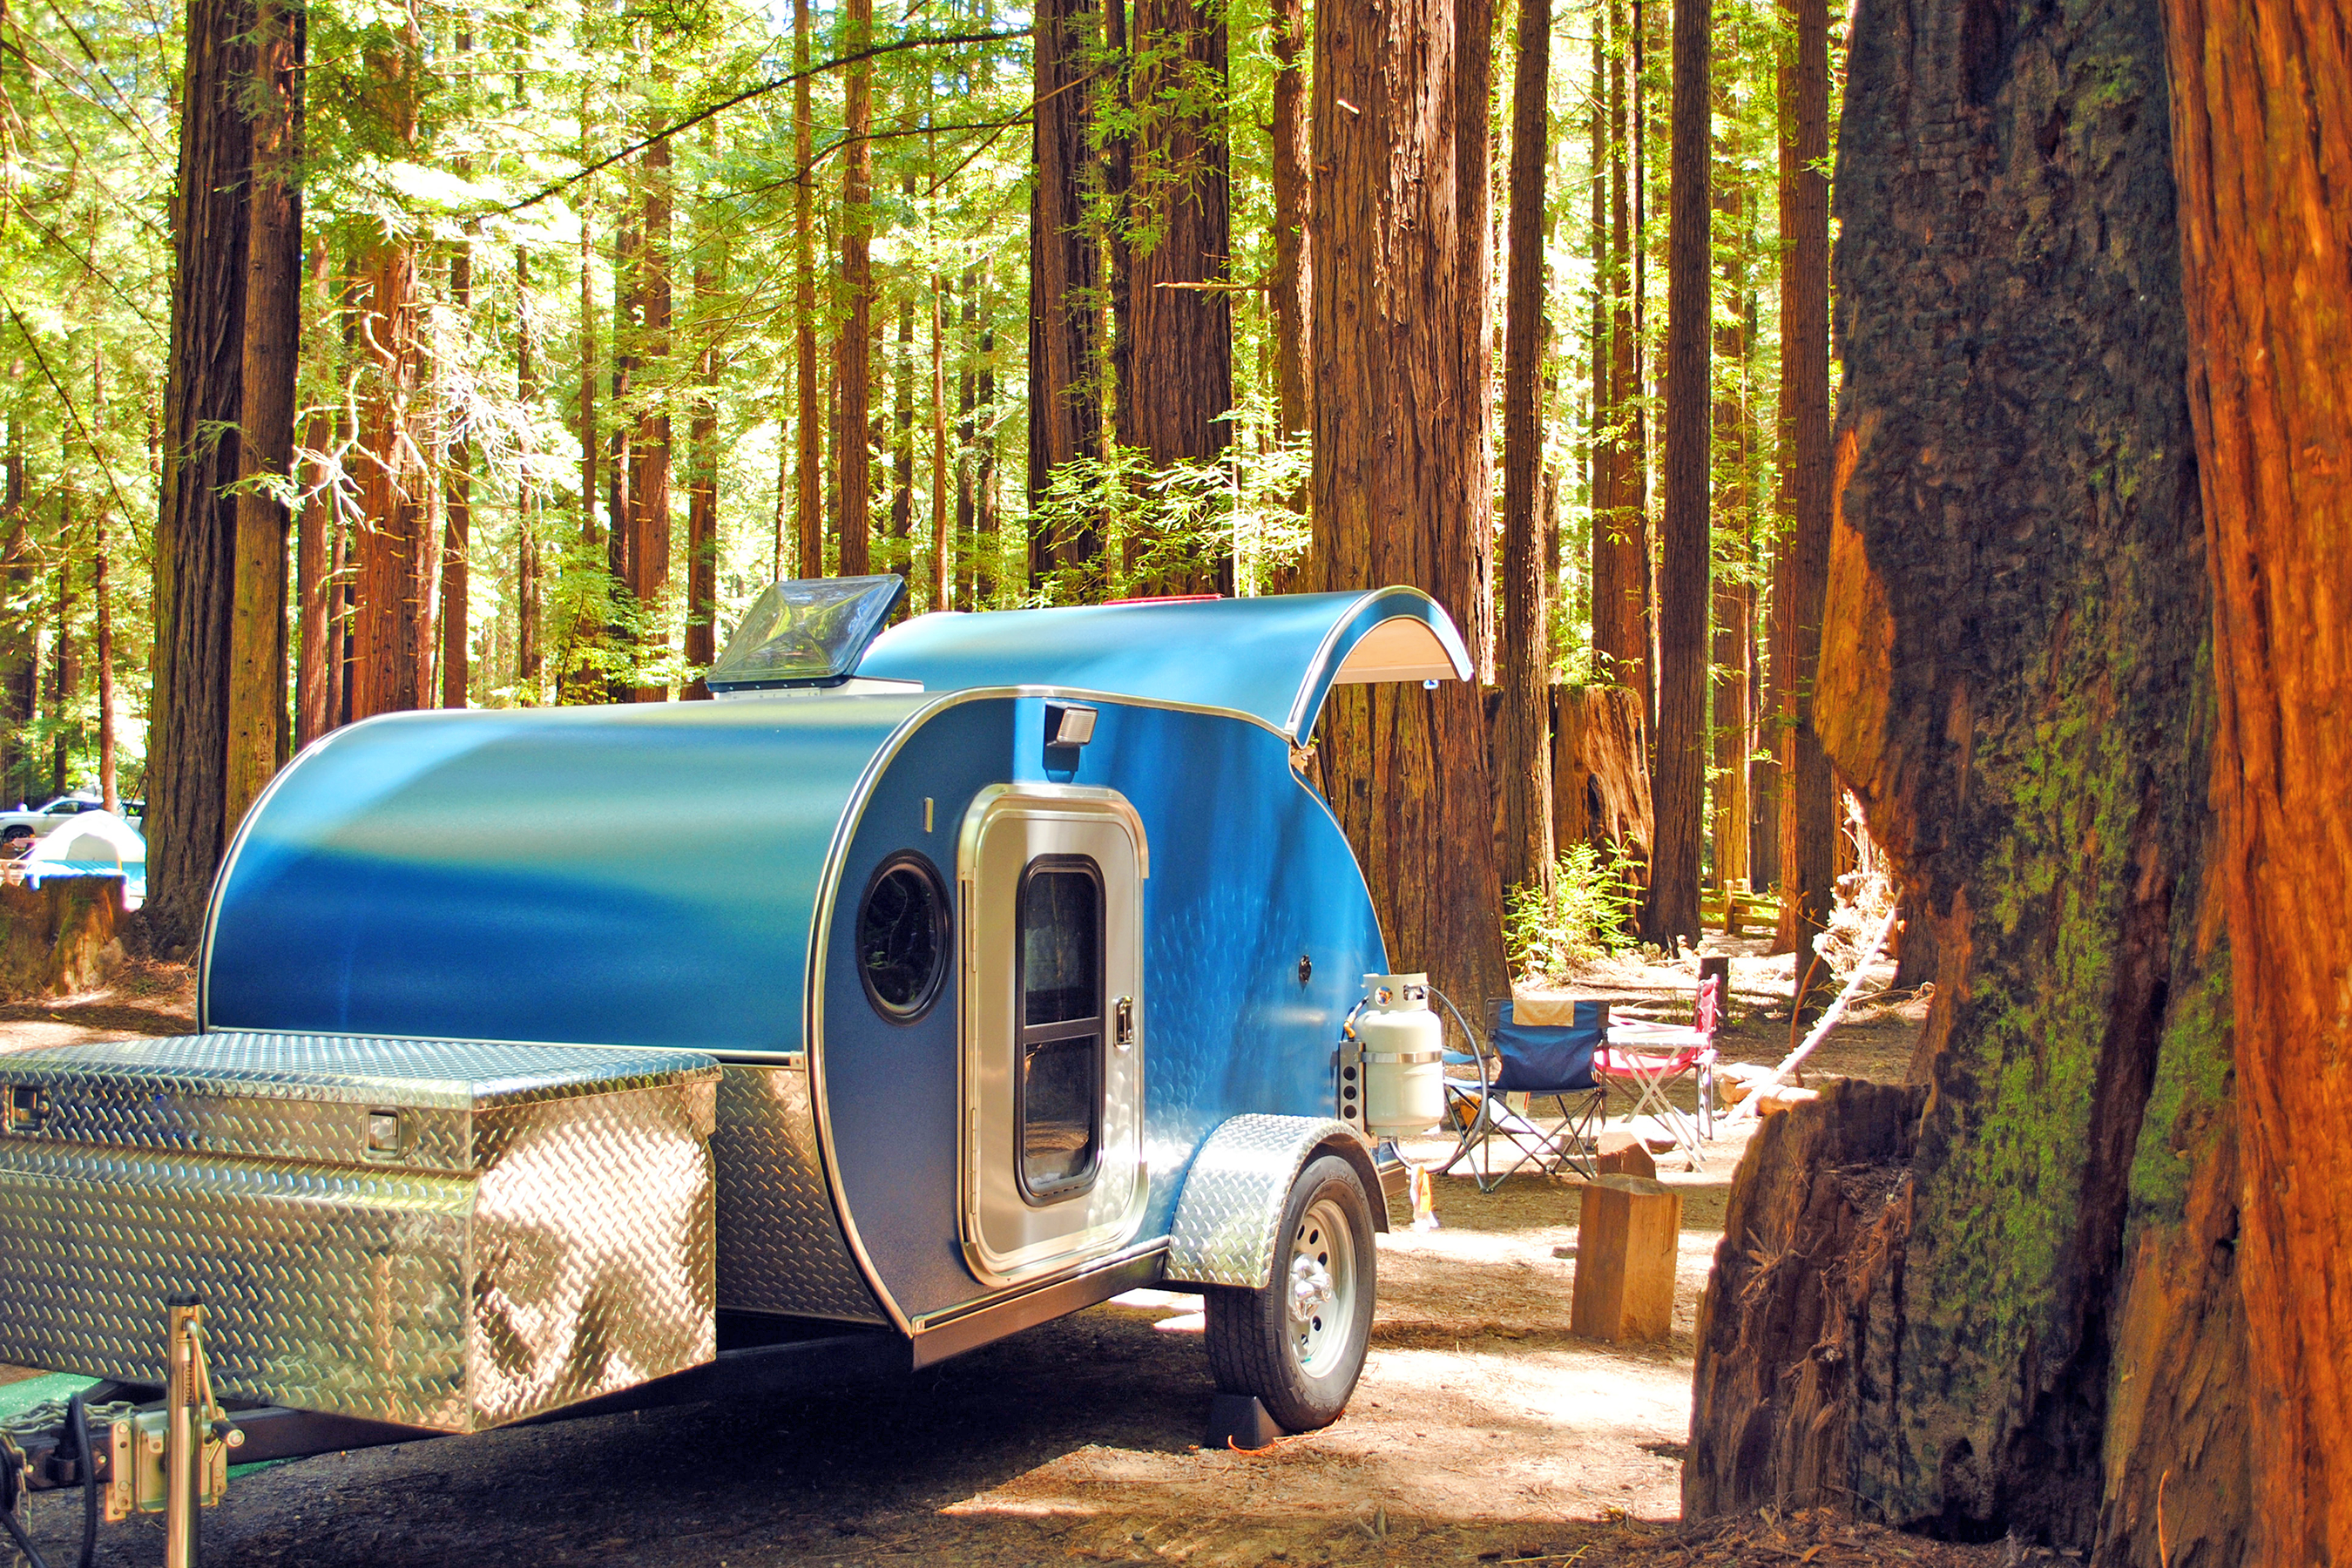 <p>Mention an "RV," and images of massive, gas-guzzling homes on wheels that appeal mainly to those nearing retirement is what might first come to mind. But an industry trend driven by — who else? — millennials is seeing recreational-vehicle profiles getting "smaller, sleeker with more technology built in," Recreational Vehicle Industry Association spokesman Kevin Broom <a href="https://www.spokesman.com/blogs/going-mobile/2019/jan/25/millennials-big-part-recent-rv-trend-data/">told The Spokesman-Review in 2019</a>. Cheapism has rounded up a few of these tiny RVs that are turning heads, at a number of different prices, from more affordable trailers that cost less than $15,000 to <a href="https://blog.cheapism.com/luxury-recreational-vehicles/">luxury motorhomes</a> that ring up at a staggering $500,000.</p><p><strong>Related:</strong> <a href="https://blog.cheapism.com/how-to-buy-an-rv/">25 Mistakes to Avoid When Buying an RV</a></p>